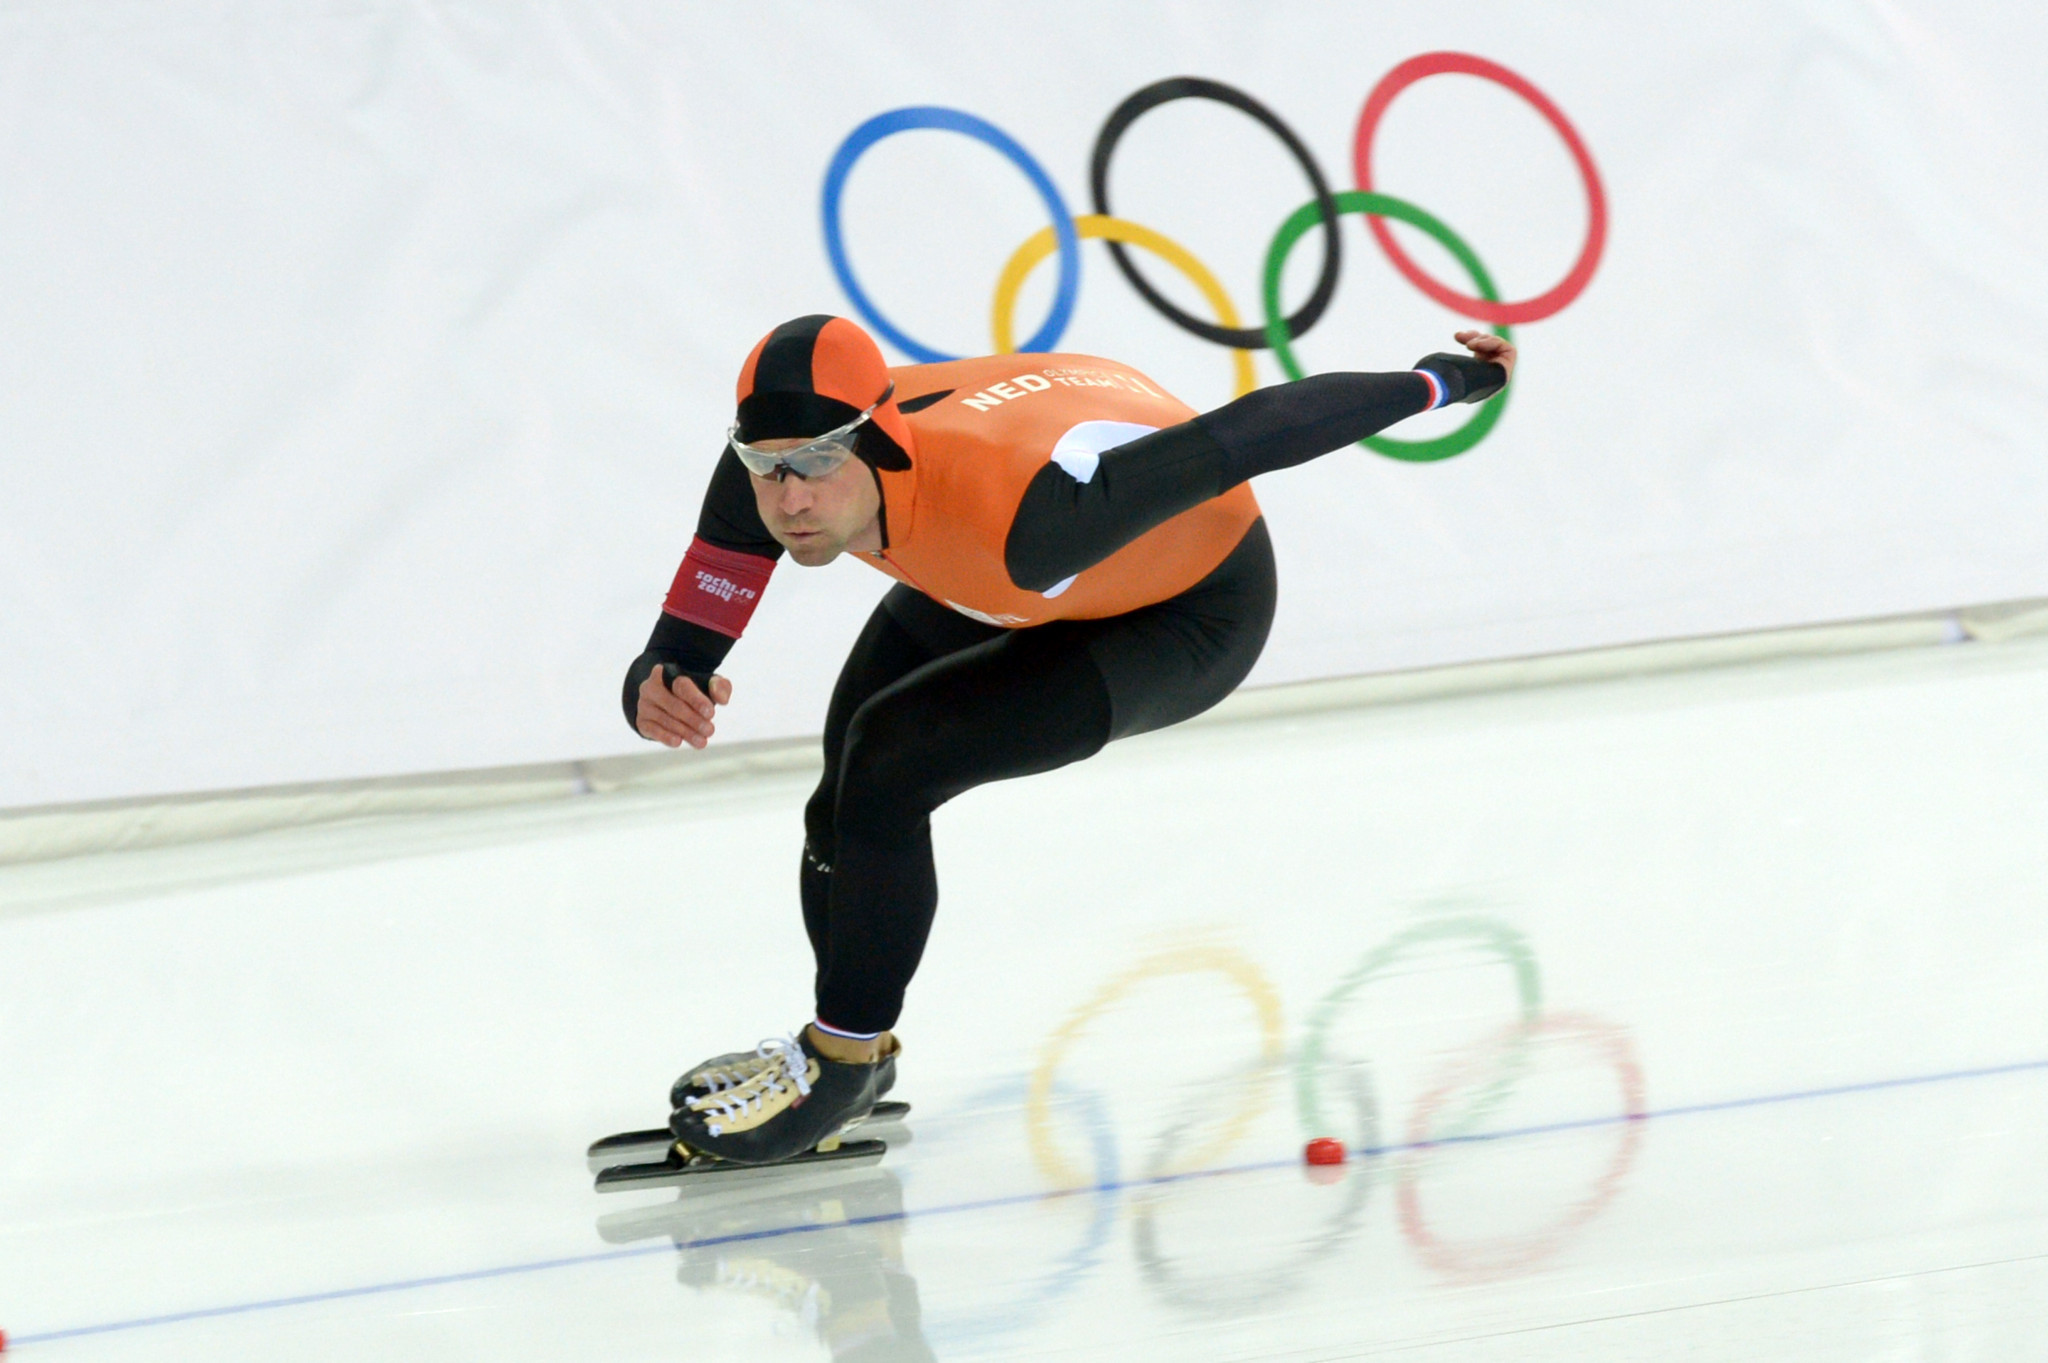 Dutch speed skater Mark Tuitert challenged an ISU ruling which prevented athletes from competing at unsanctioned events ©Getty Images